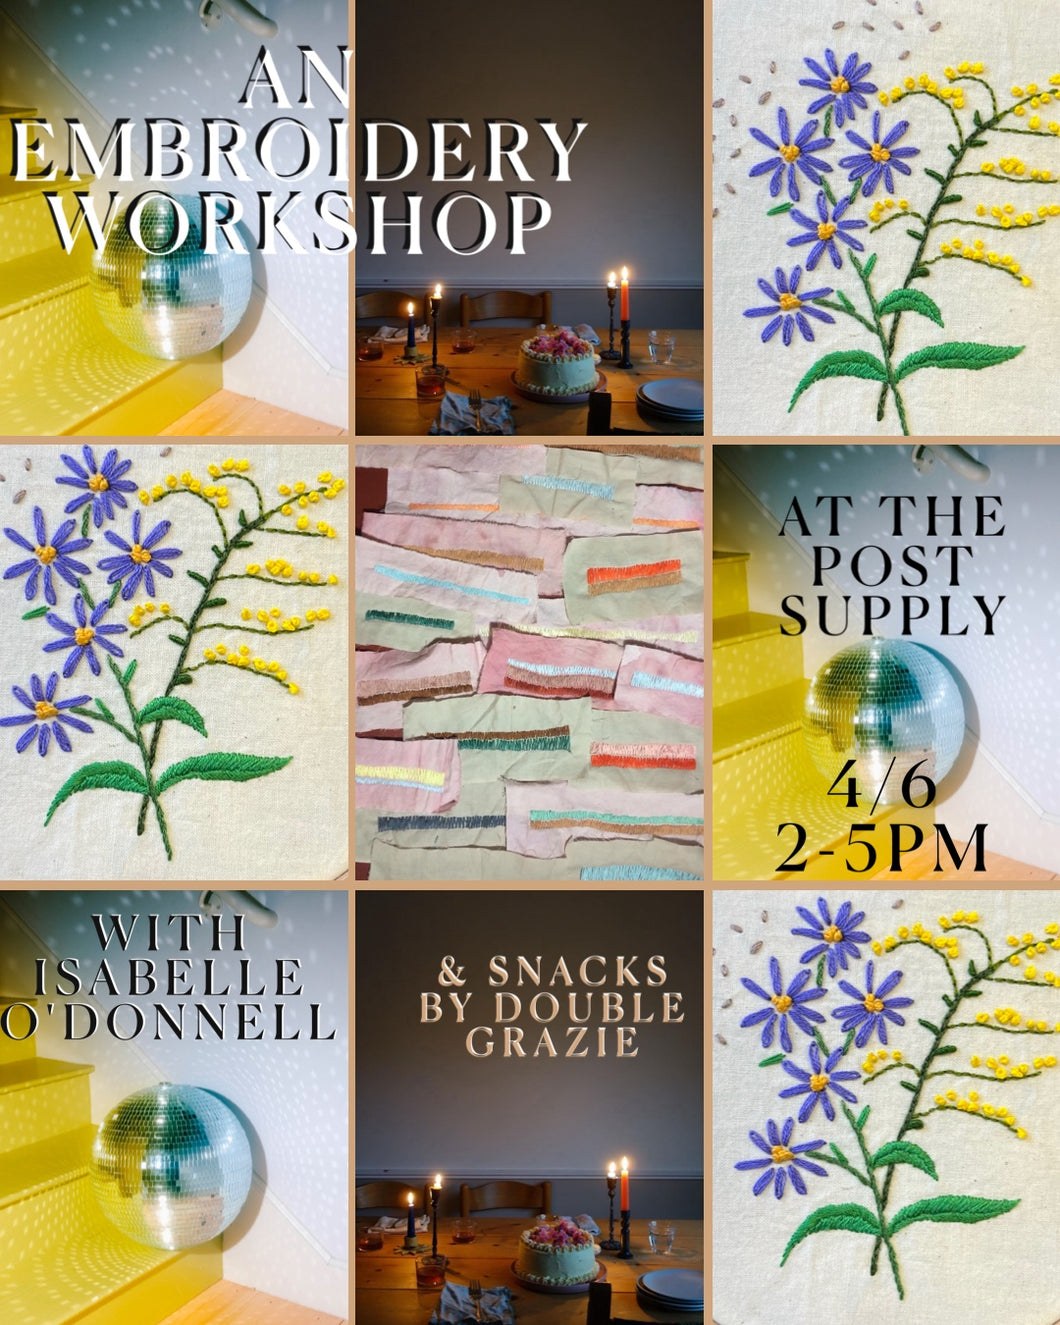 Embroidery Workshop with Isabelle O'Donnell